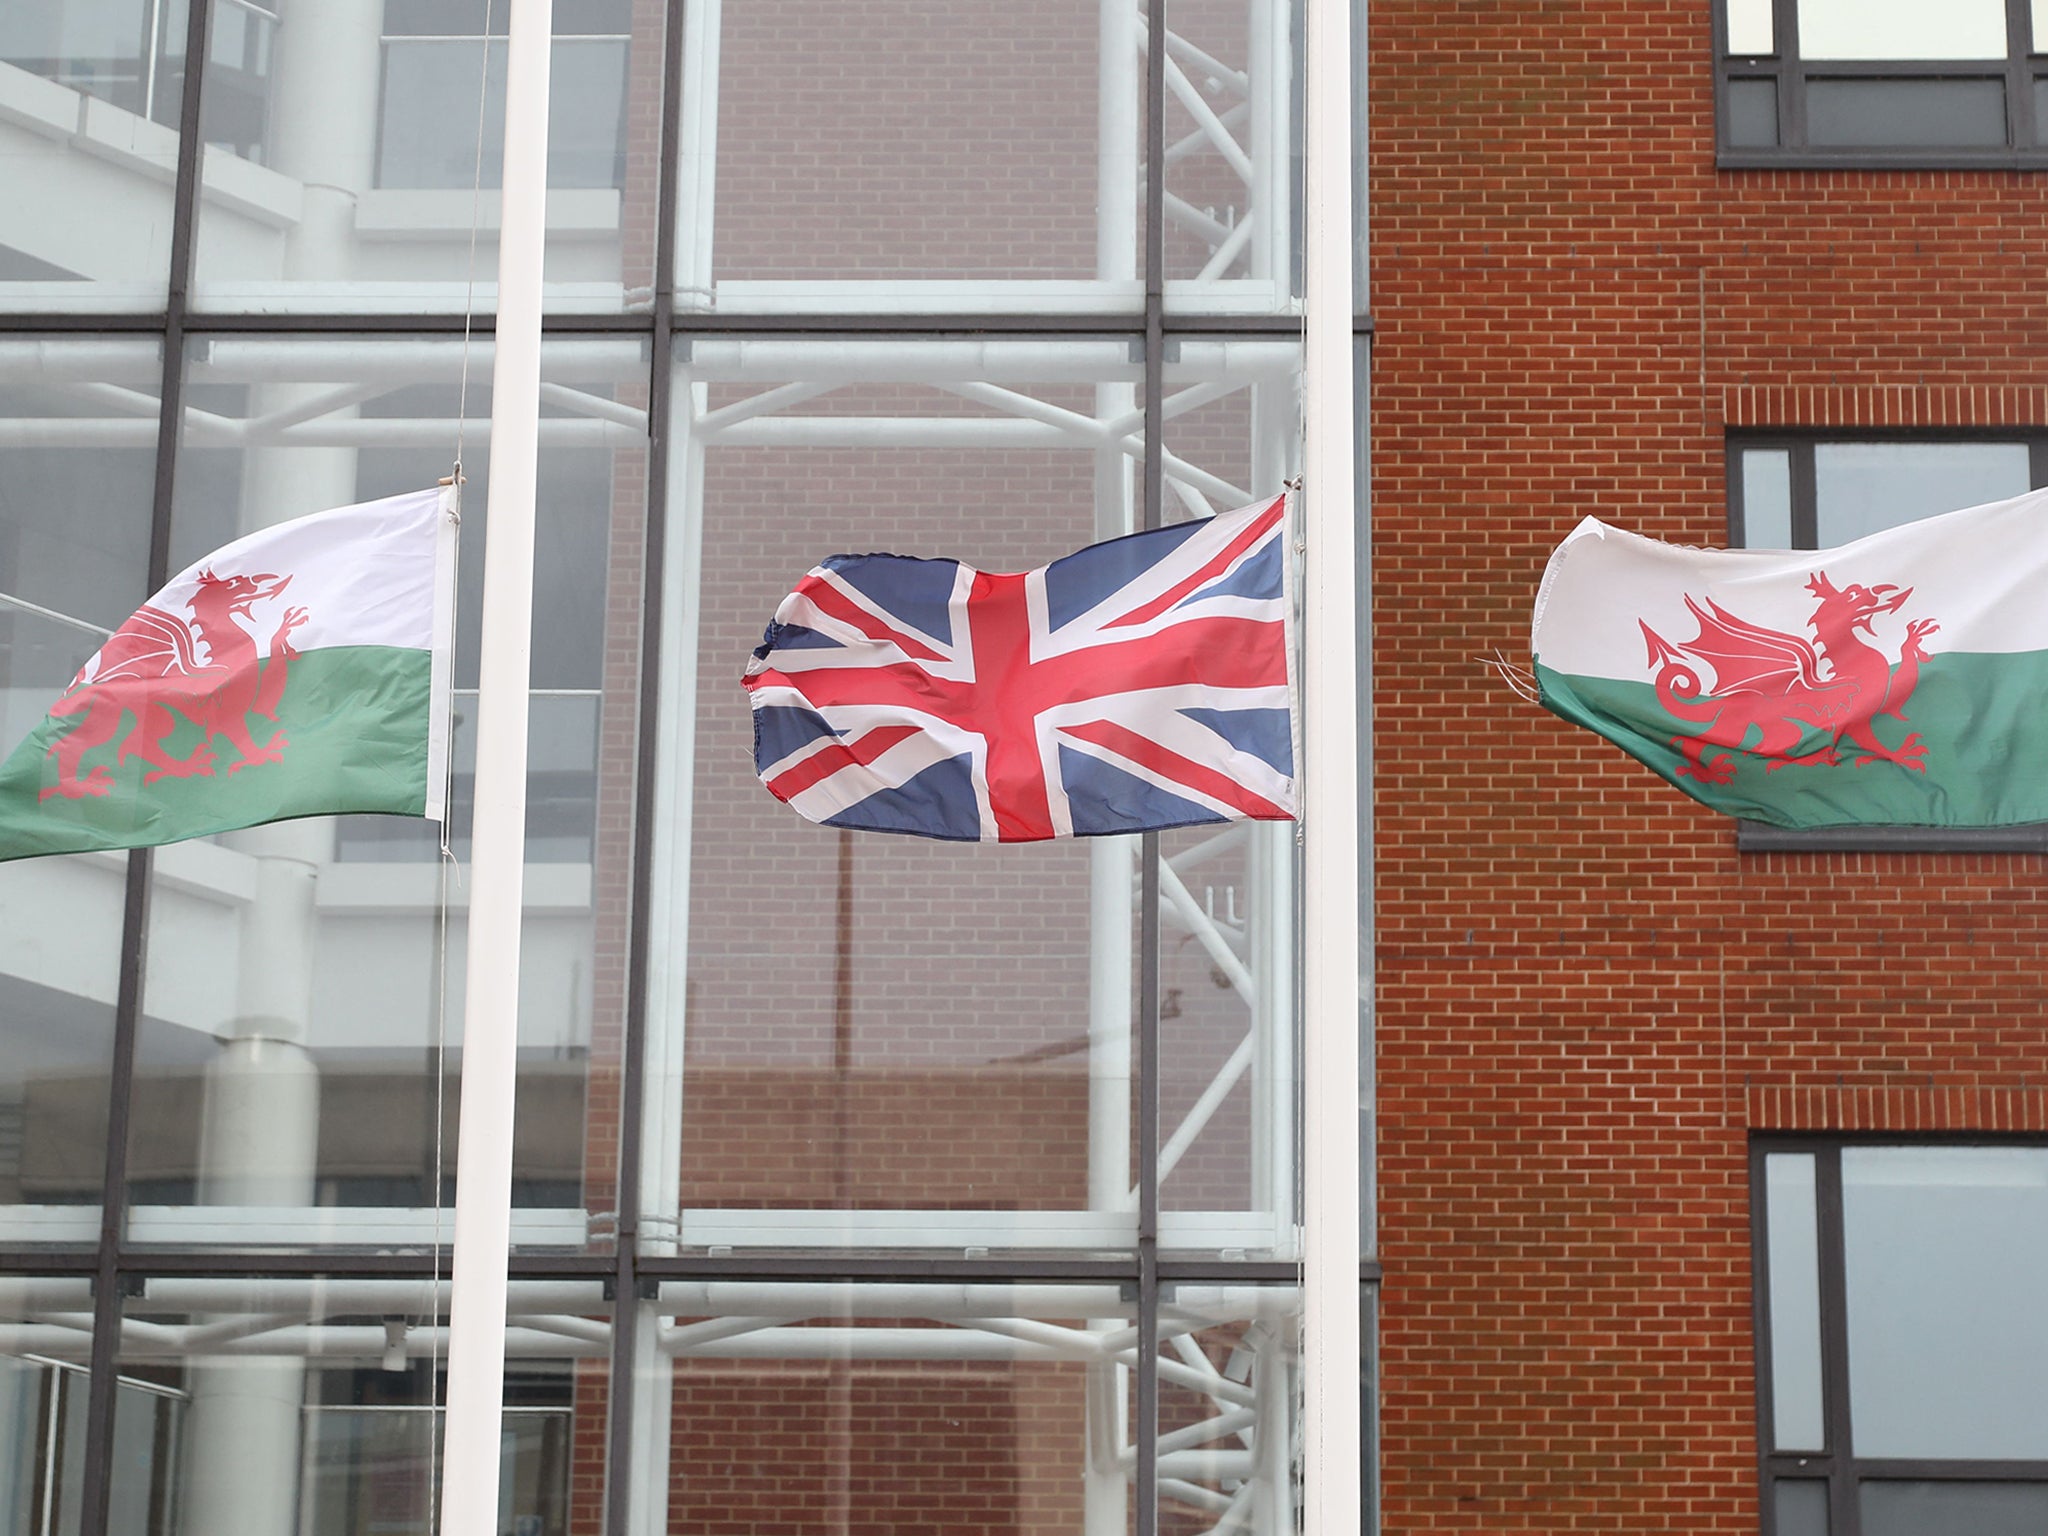 The 6 May elections could reflect a growing independence movement in Wales